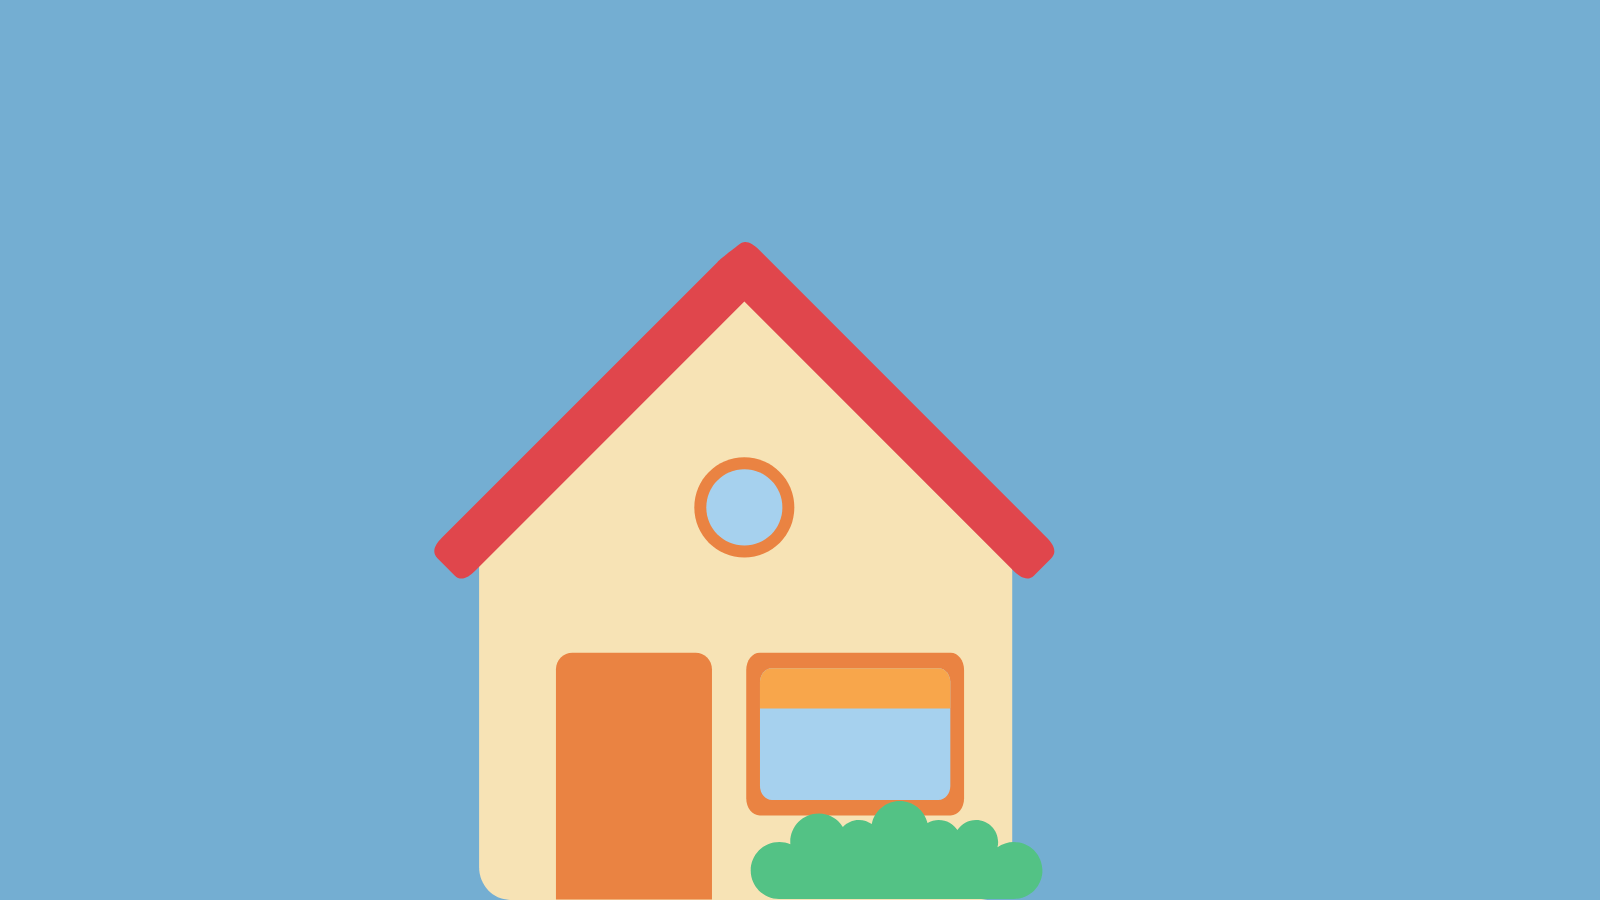 A simple illustration of a house